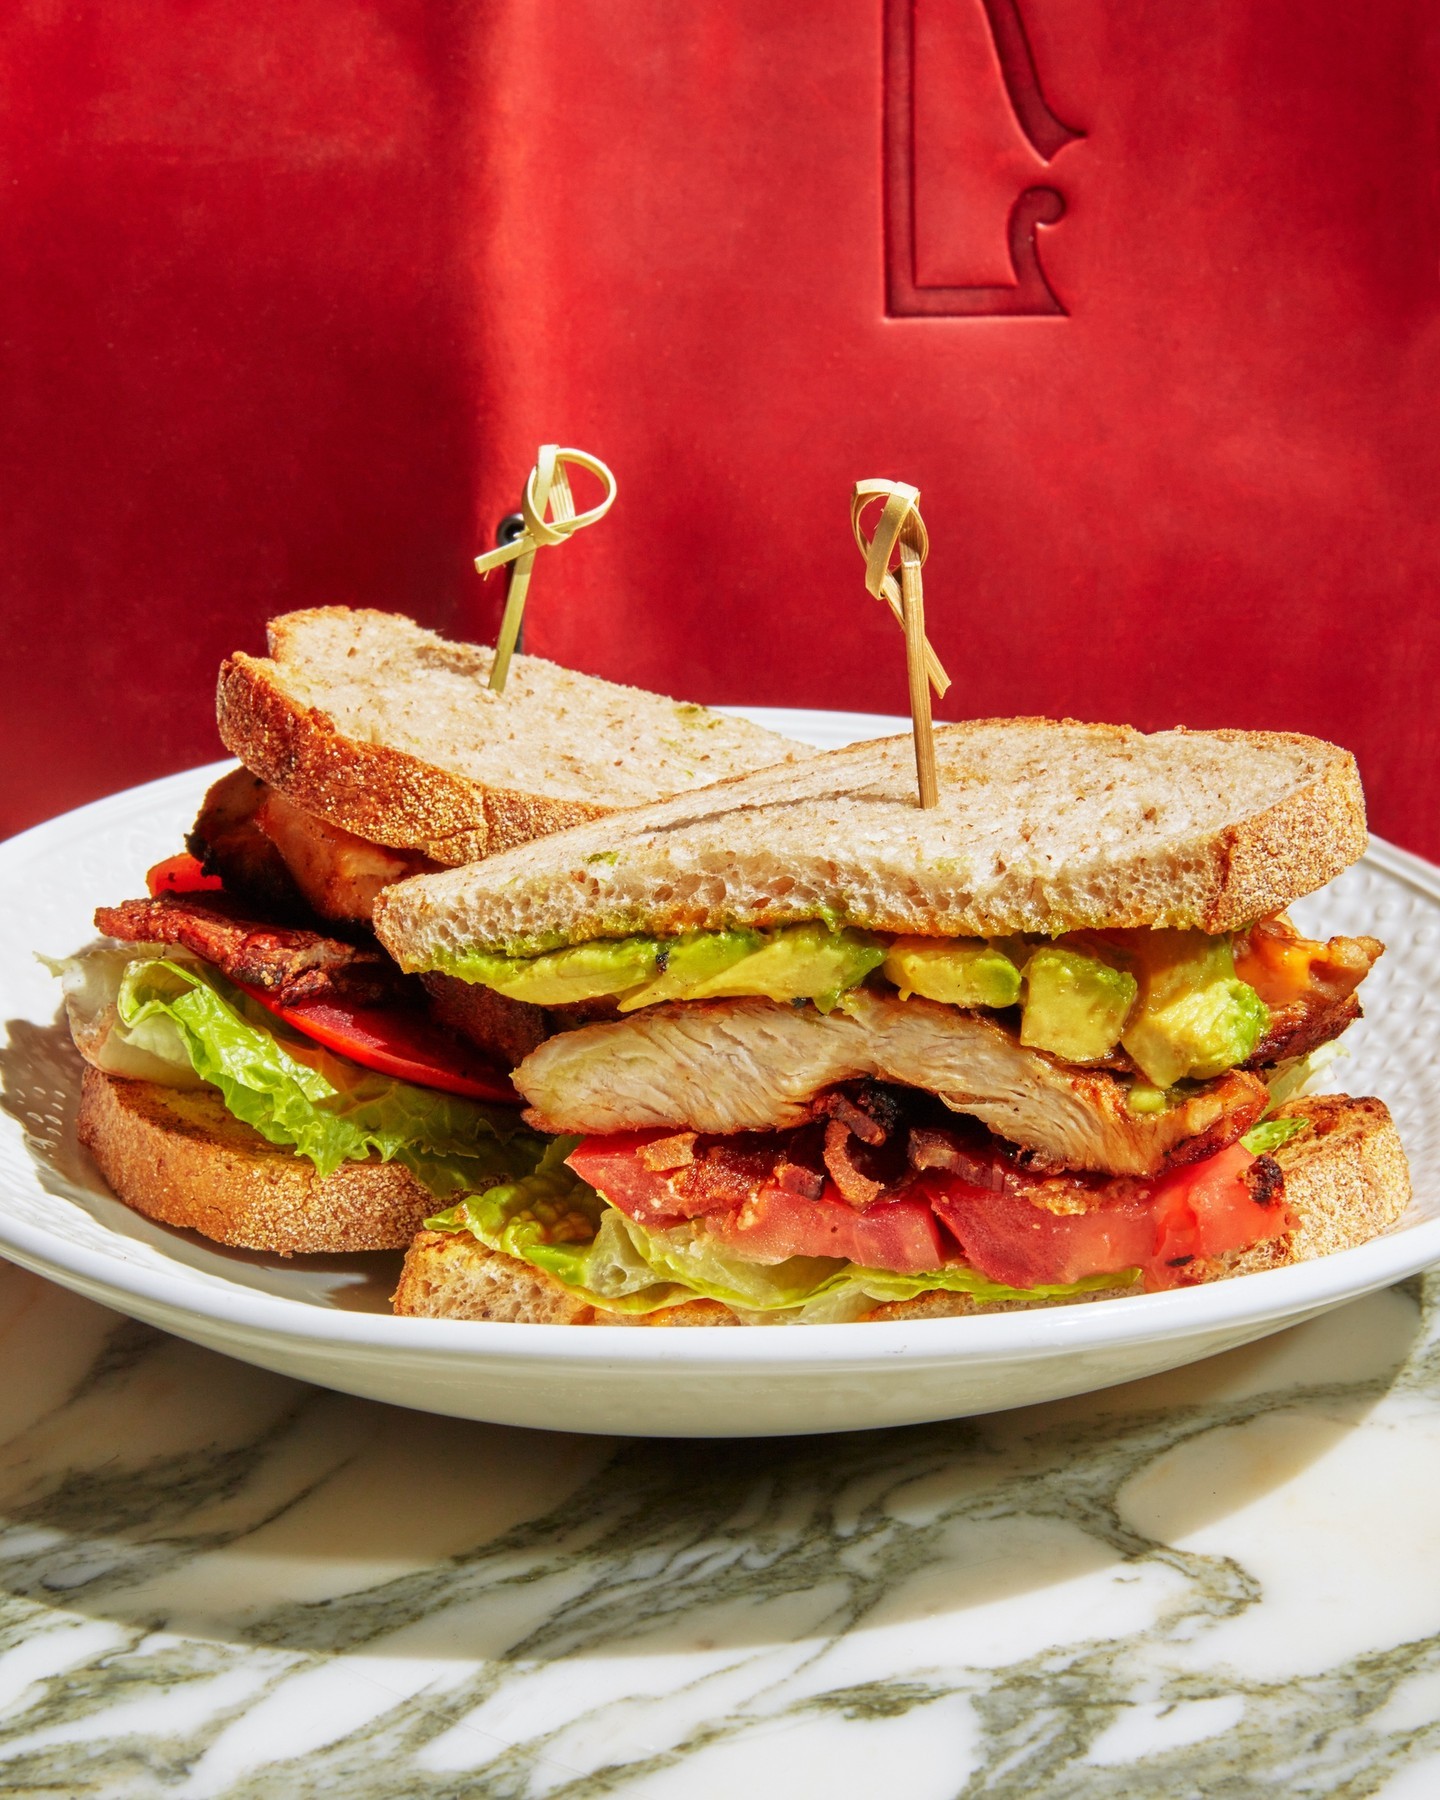 after a day of wandering through gorgeous Central Park, refuel with a picture-perfect Chicken Club Sandwich on Rose Lane's patio. roasted chicken, avocado, bacon, lettuce, tomato, chipotle mayo – what more could you need?⁠⁠photo: @emmafishman